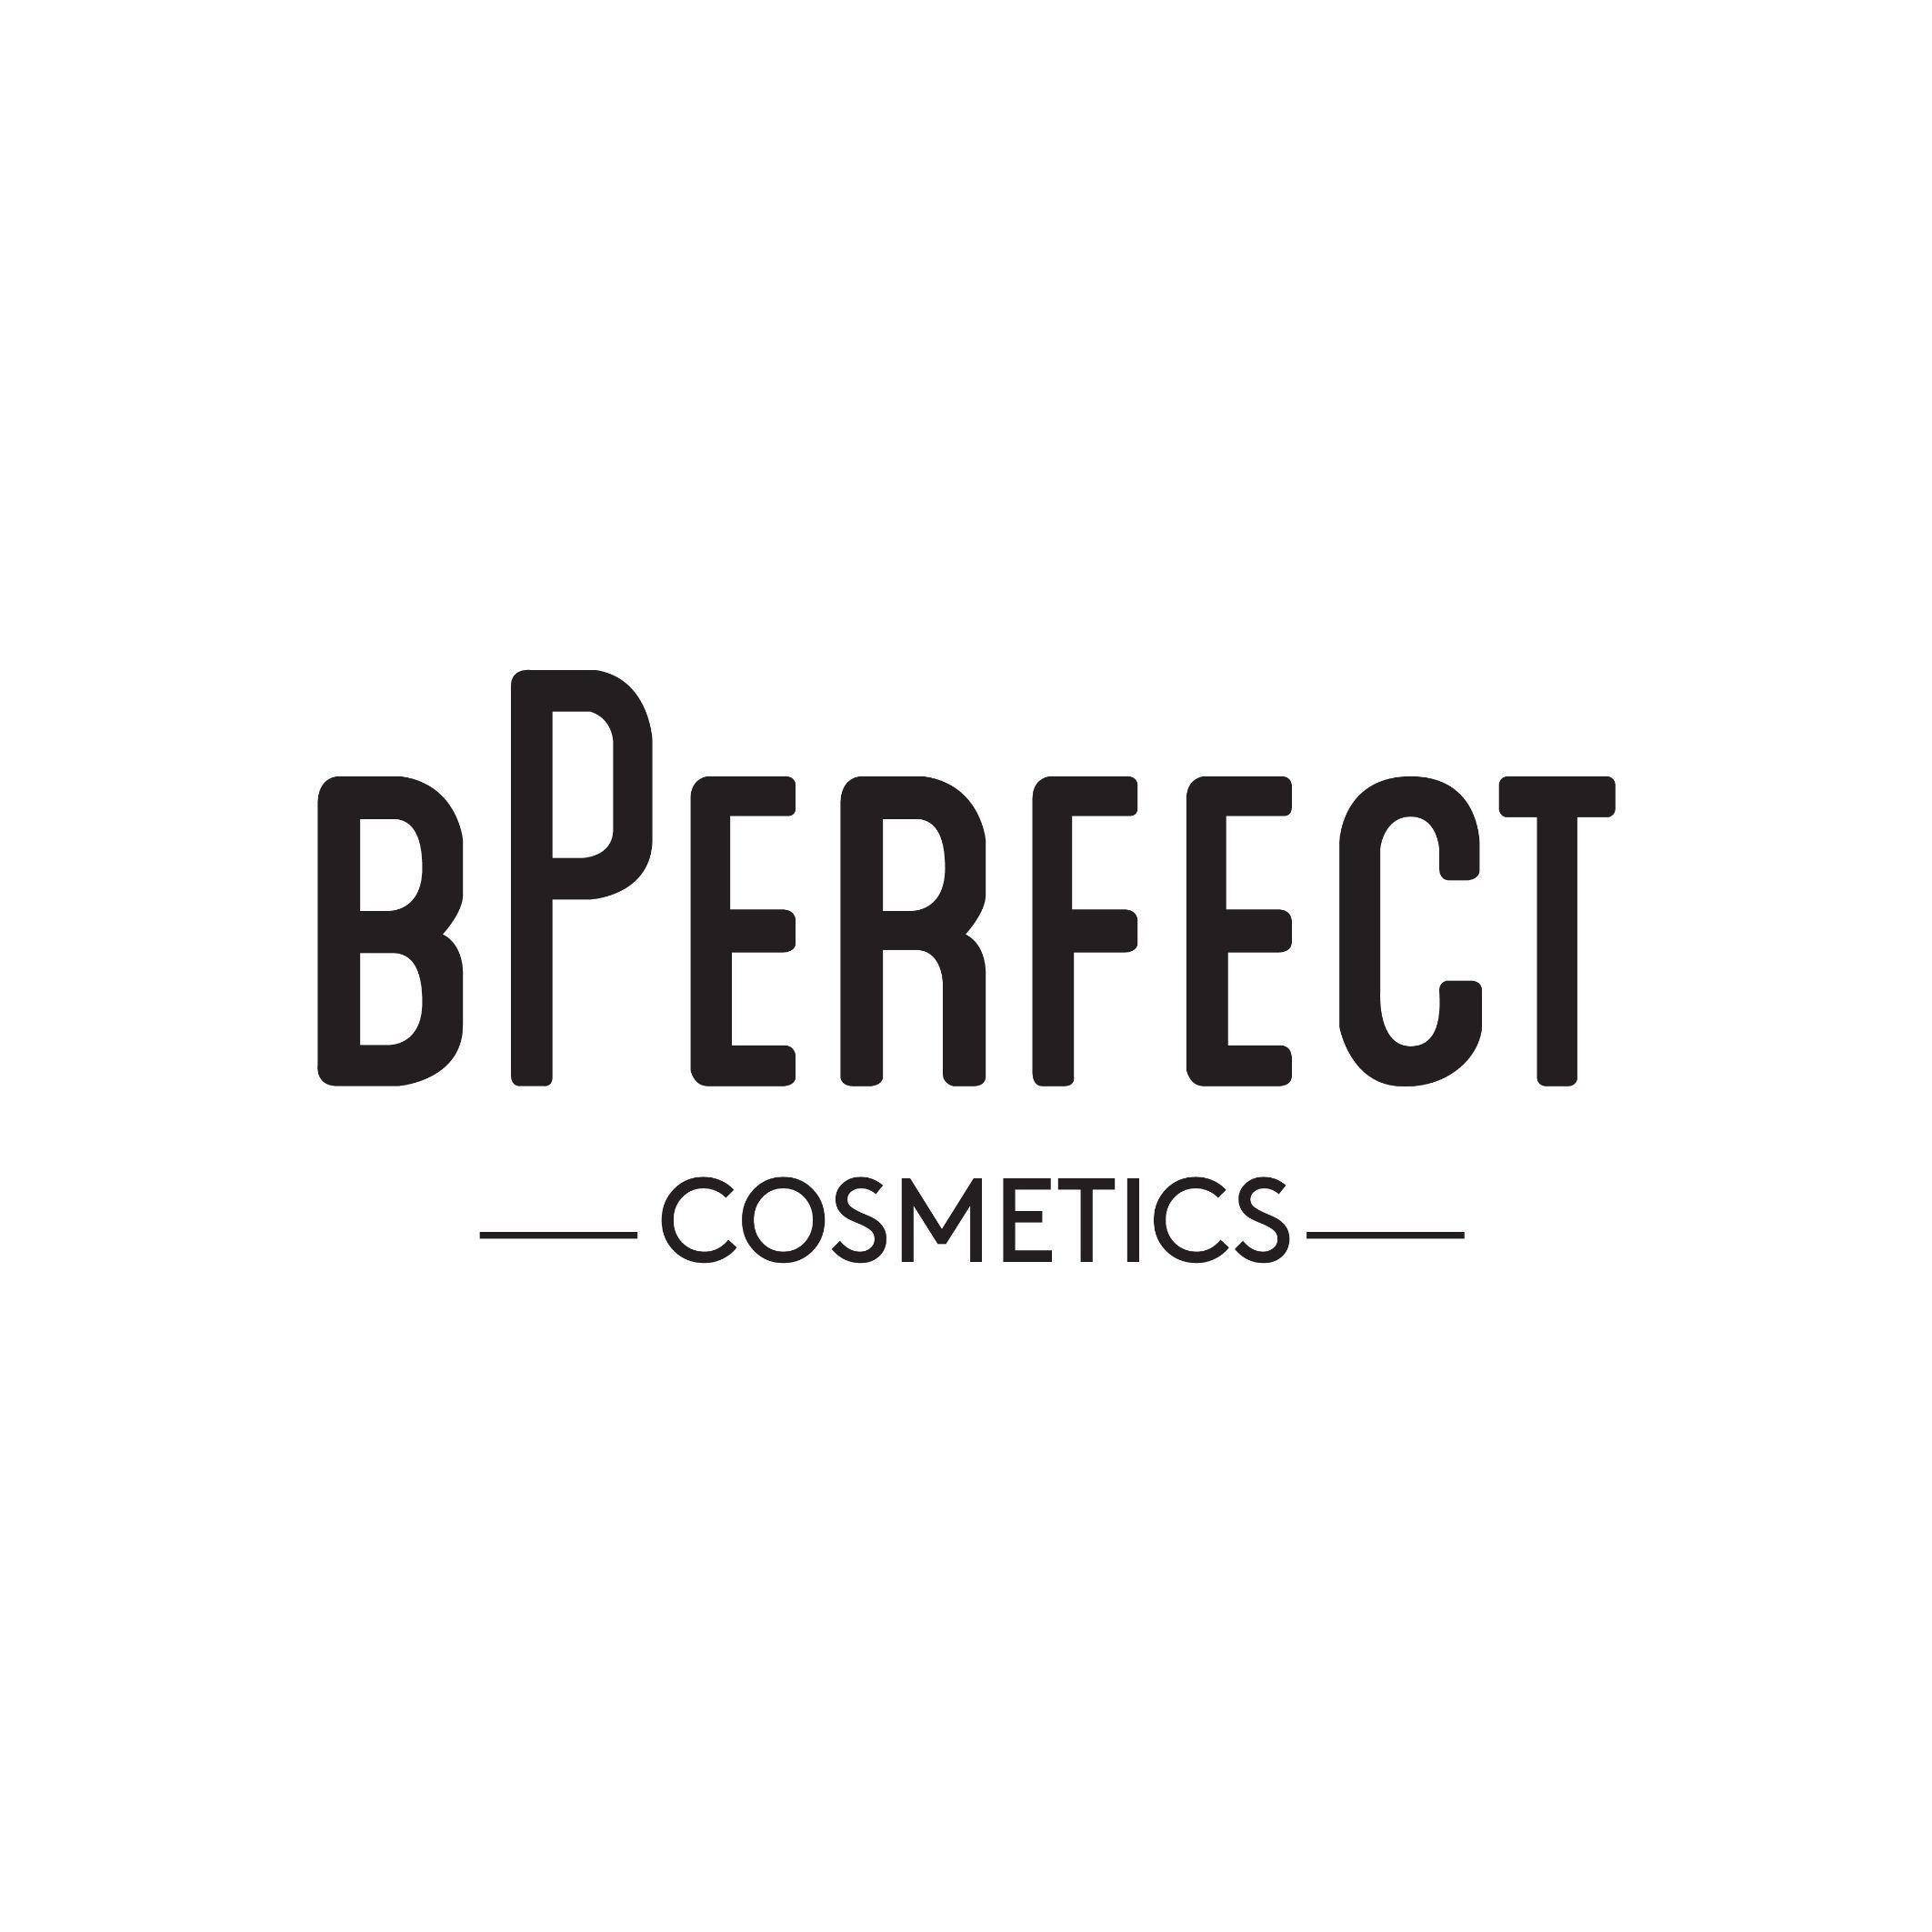 BPerfect Cosmetics Galway, Eyre Square, Gaillimh